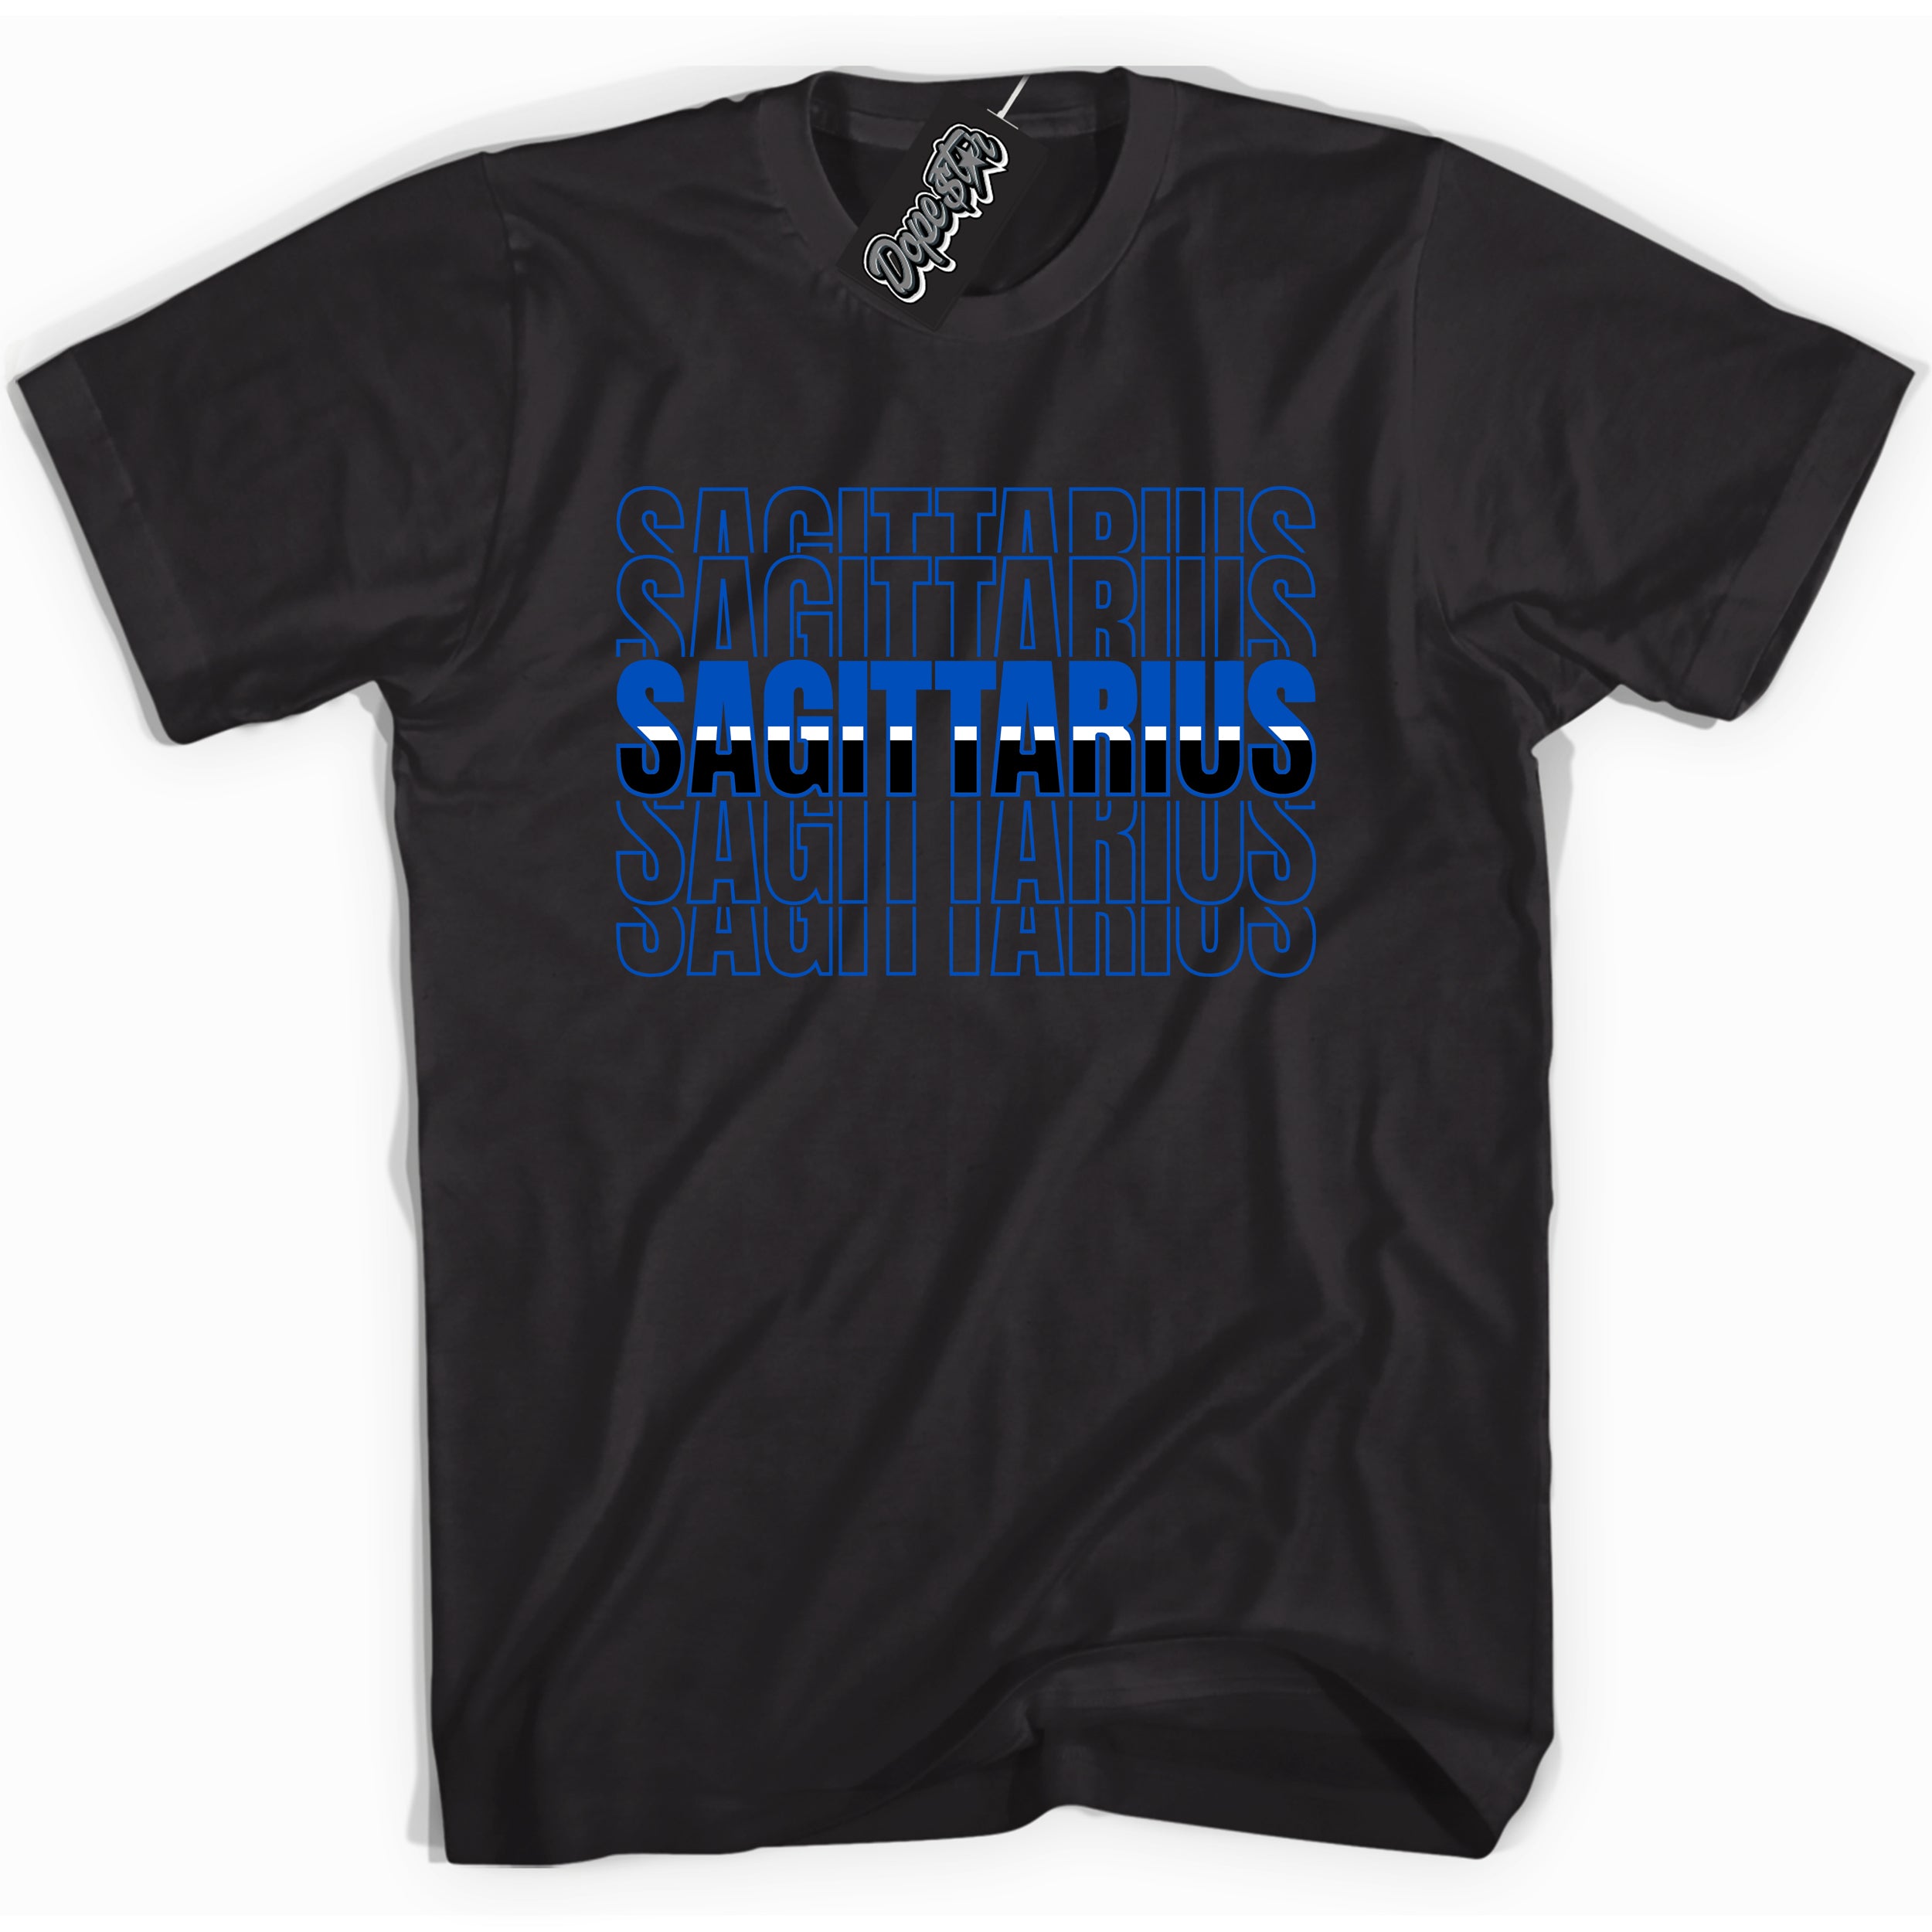 Cool Black graphic tee with "Sagittarius" design, that perfectly matches Royal Reimagined 1s sneakers 